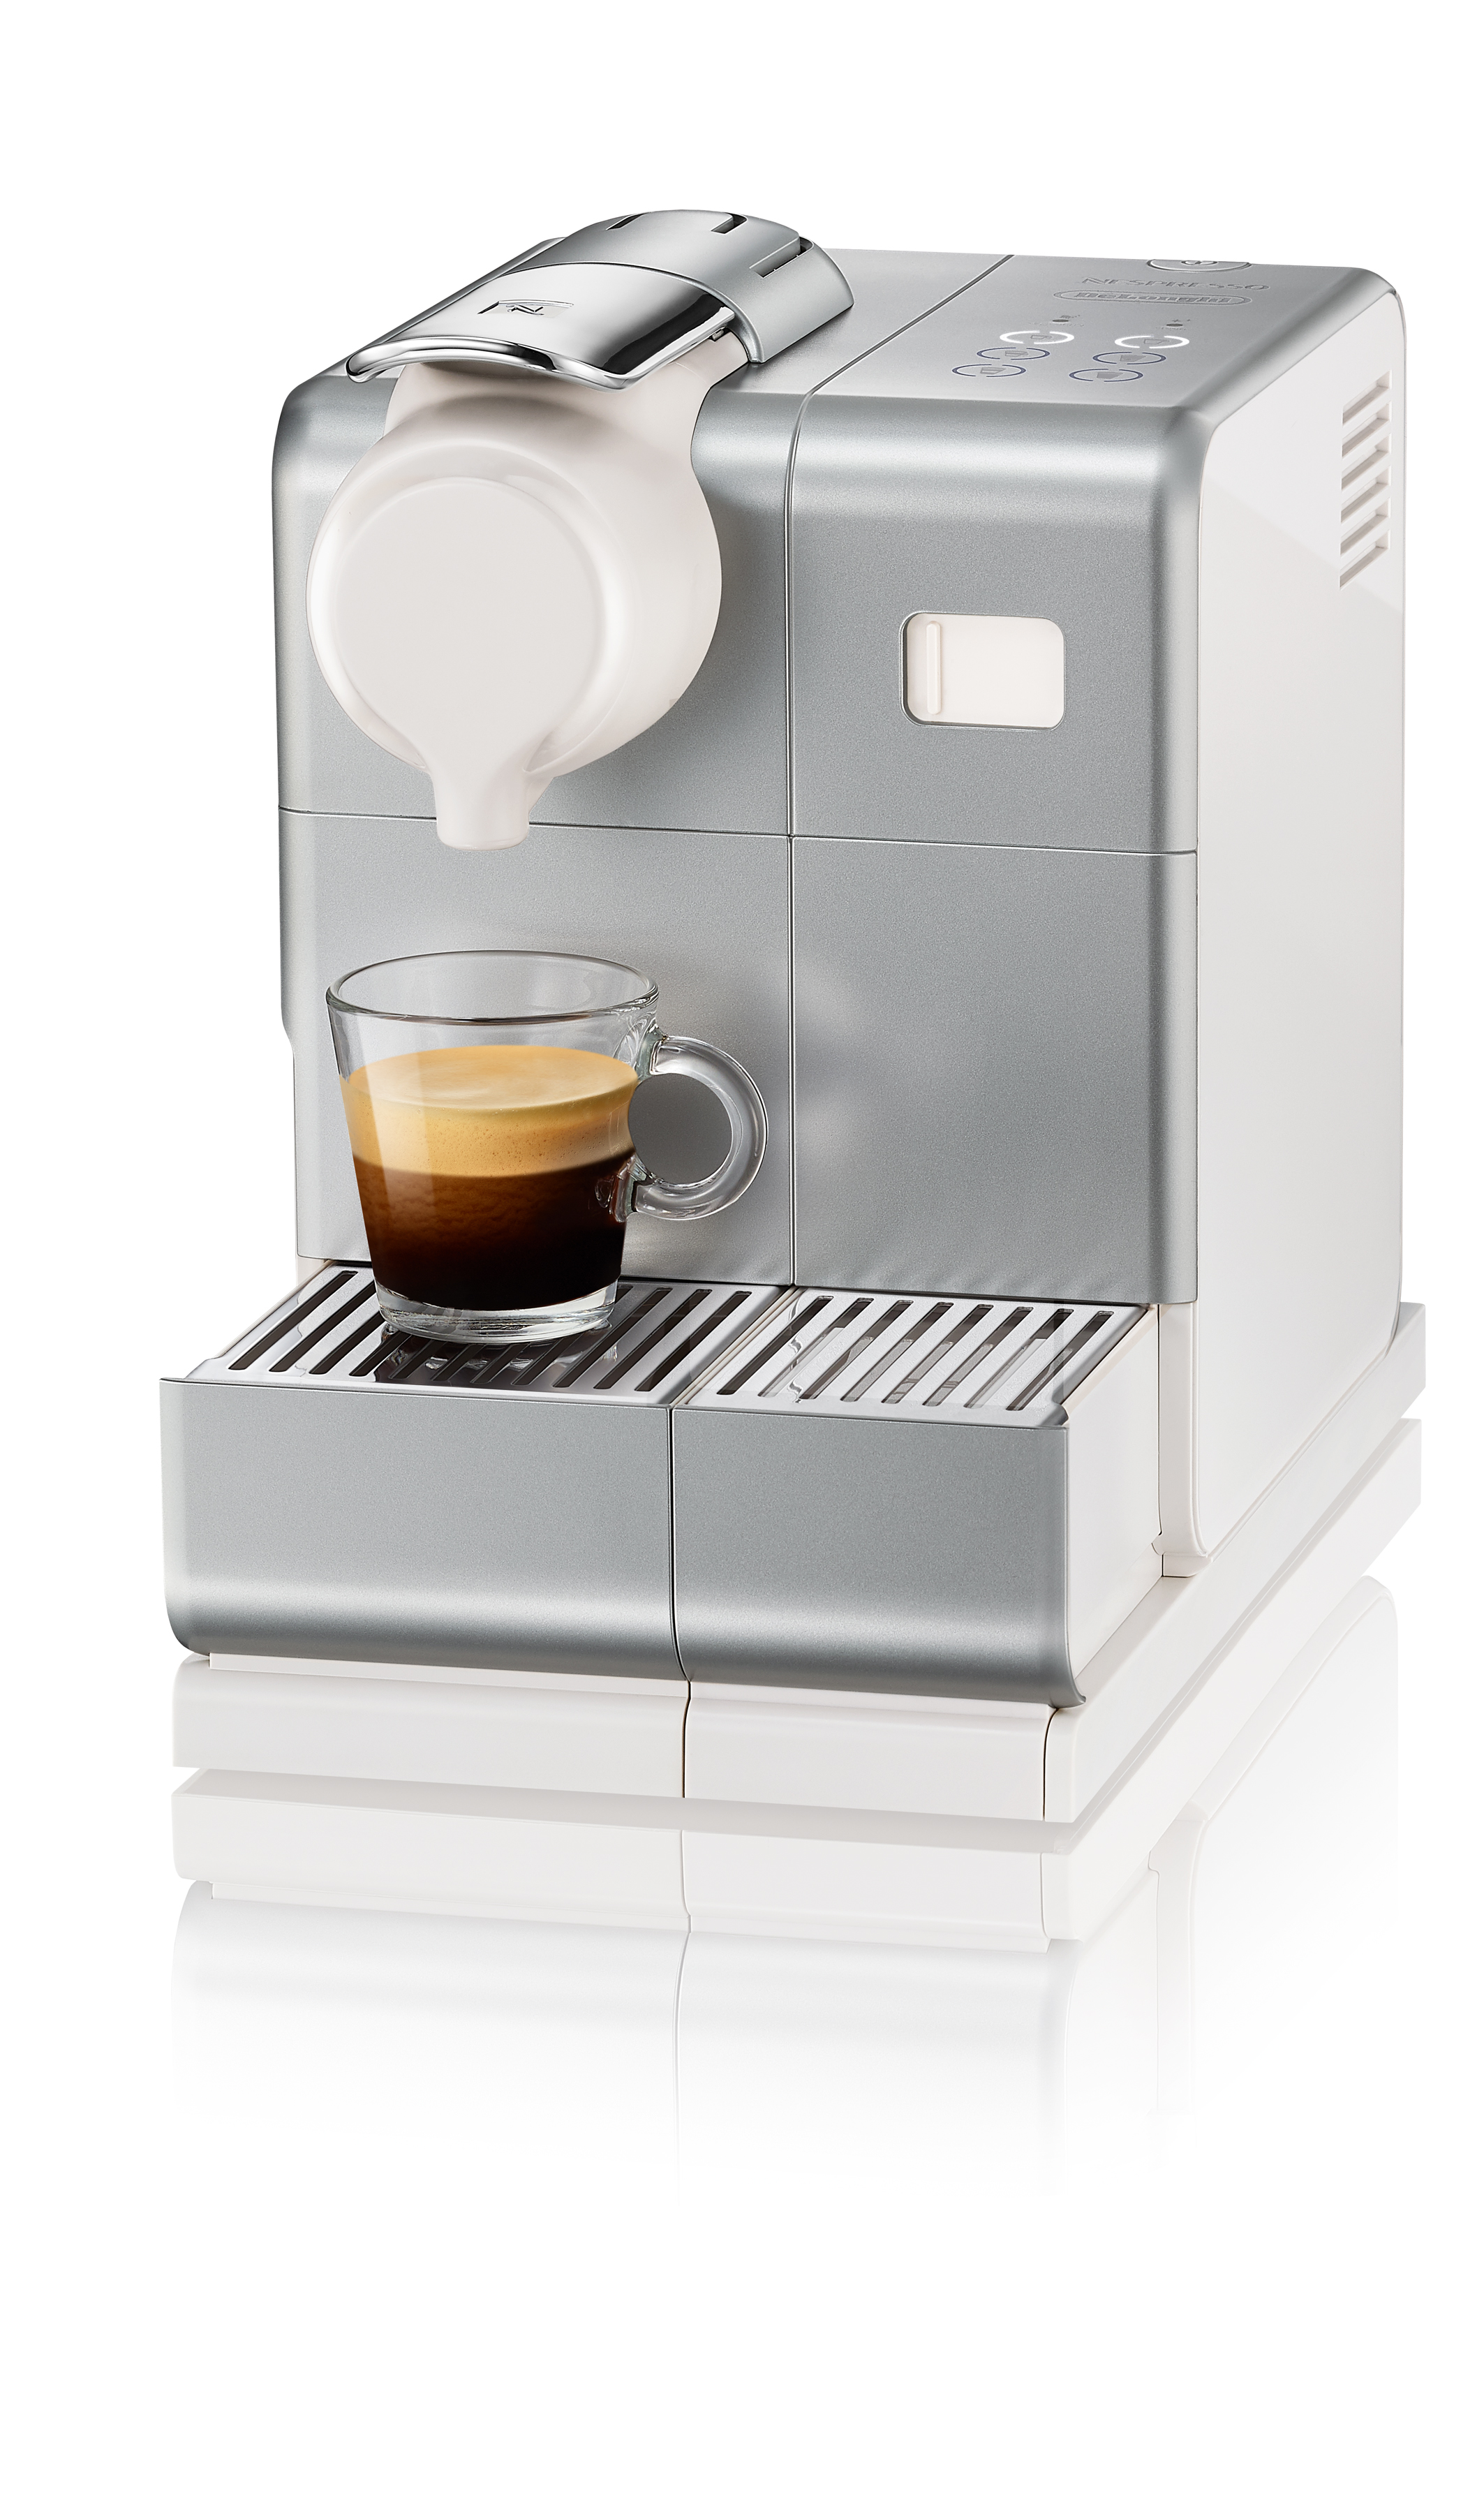 DeLonghi EN 560.S Lattissima Touch, comparison, manual, troubleshooting, repair and member rating Bean2cup.org